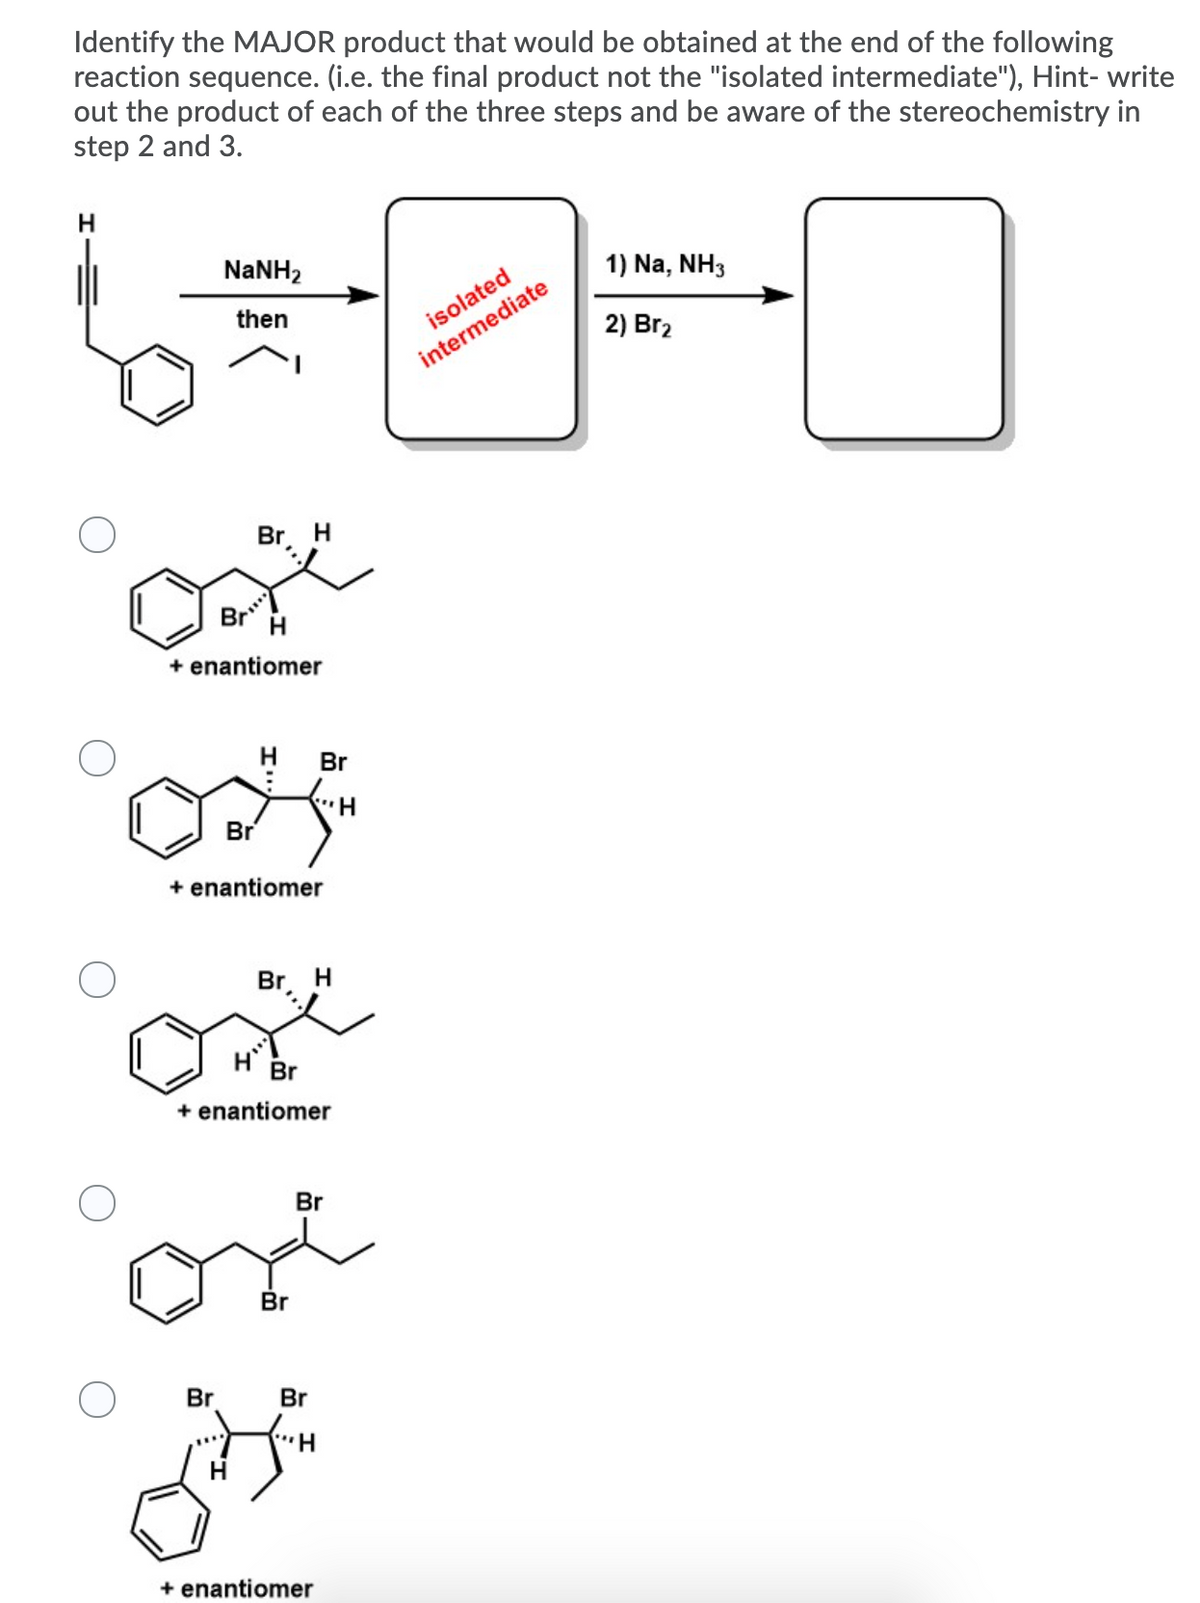 Identify the MAJOR product that would be obtained at the end of the following
reaction sequence. (i.e. the final product not the "isolated intermediate"), Hint- write
out the product of each of the three steps and be aware of the stereochemistry in
step 2 and 3.
H.
NaNH2
1) Na, NH3
then
2) Br2
intermediate
Br H
Br*
H
+ enantiomer
H
Br
..
Br
+ enantiomer
Br. H
Br
+ enantiomer
Br
Br
Br
Br
H
+ enantiomer
